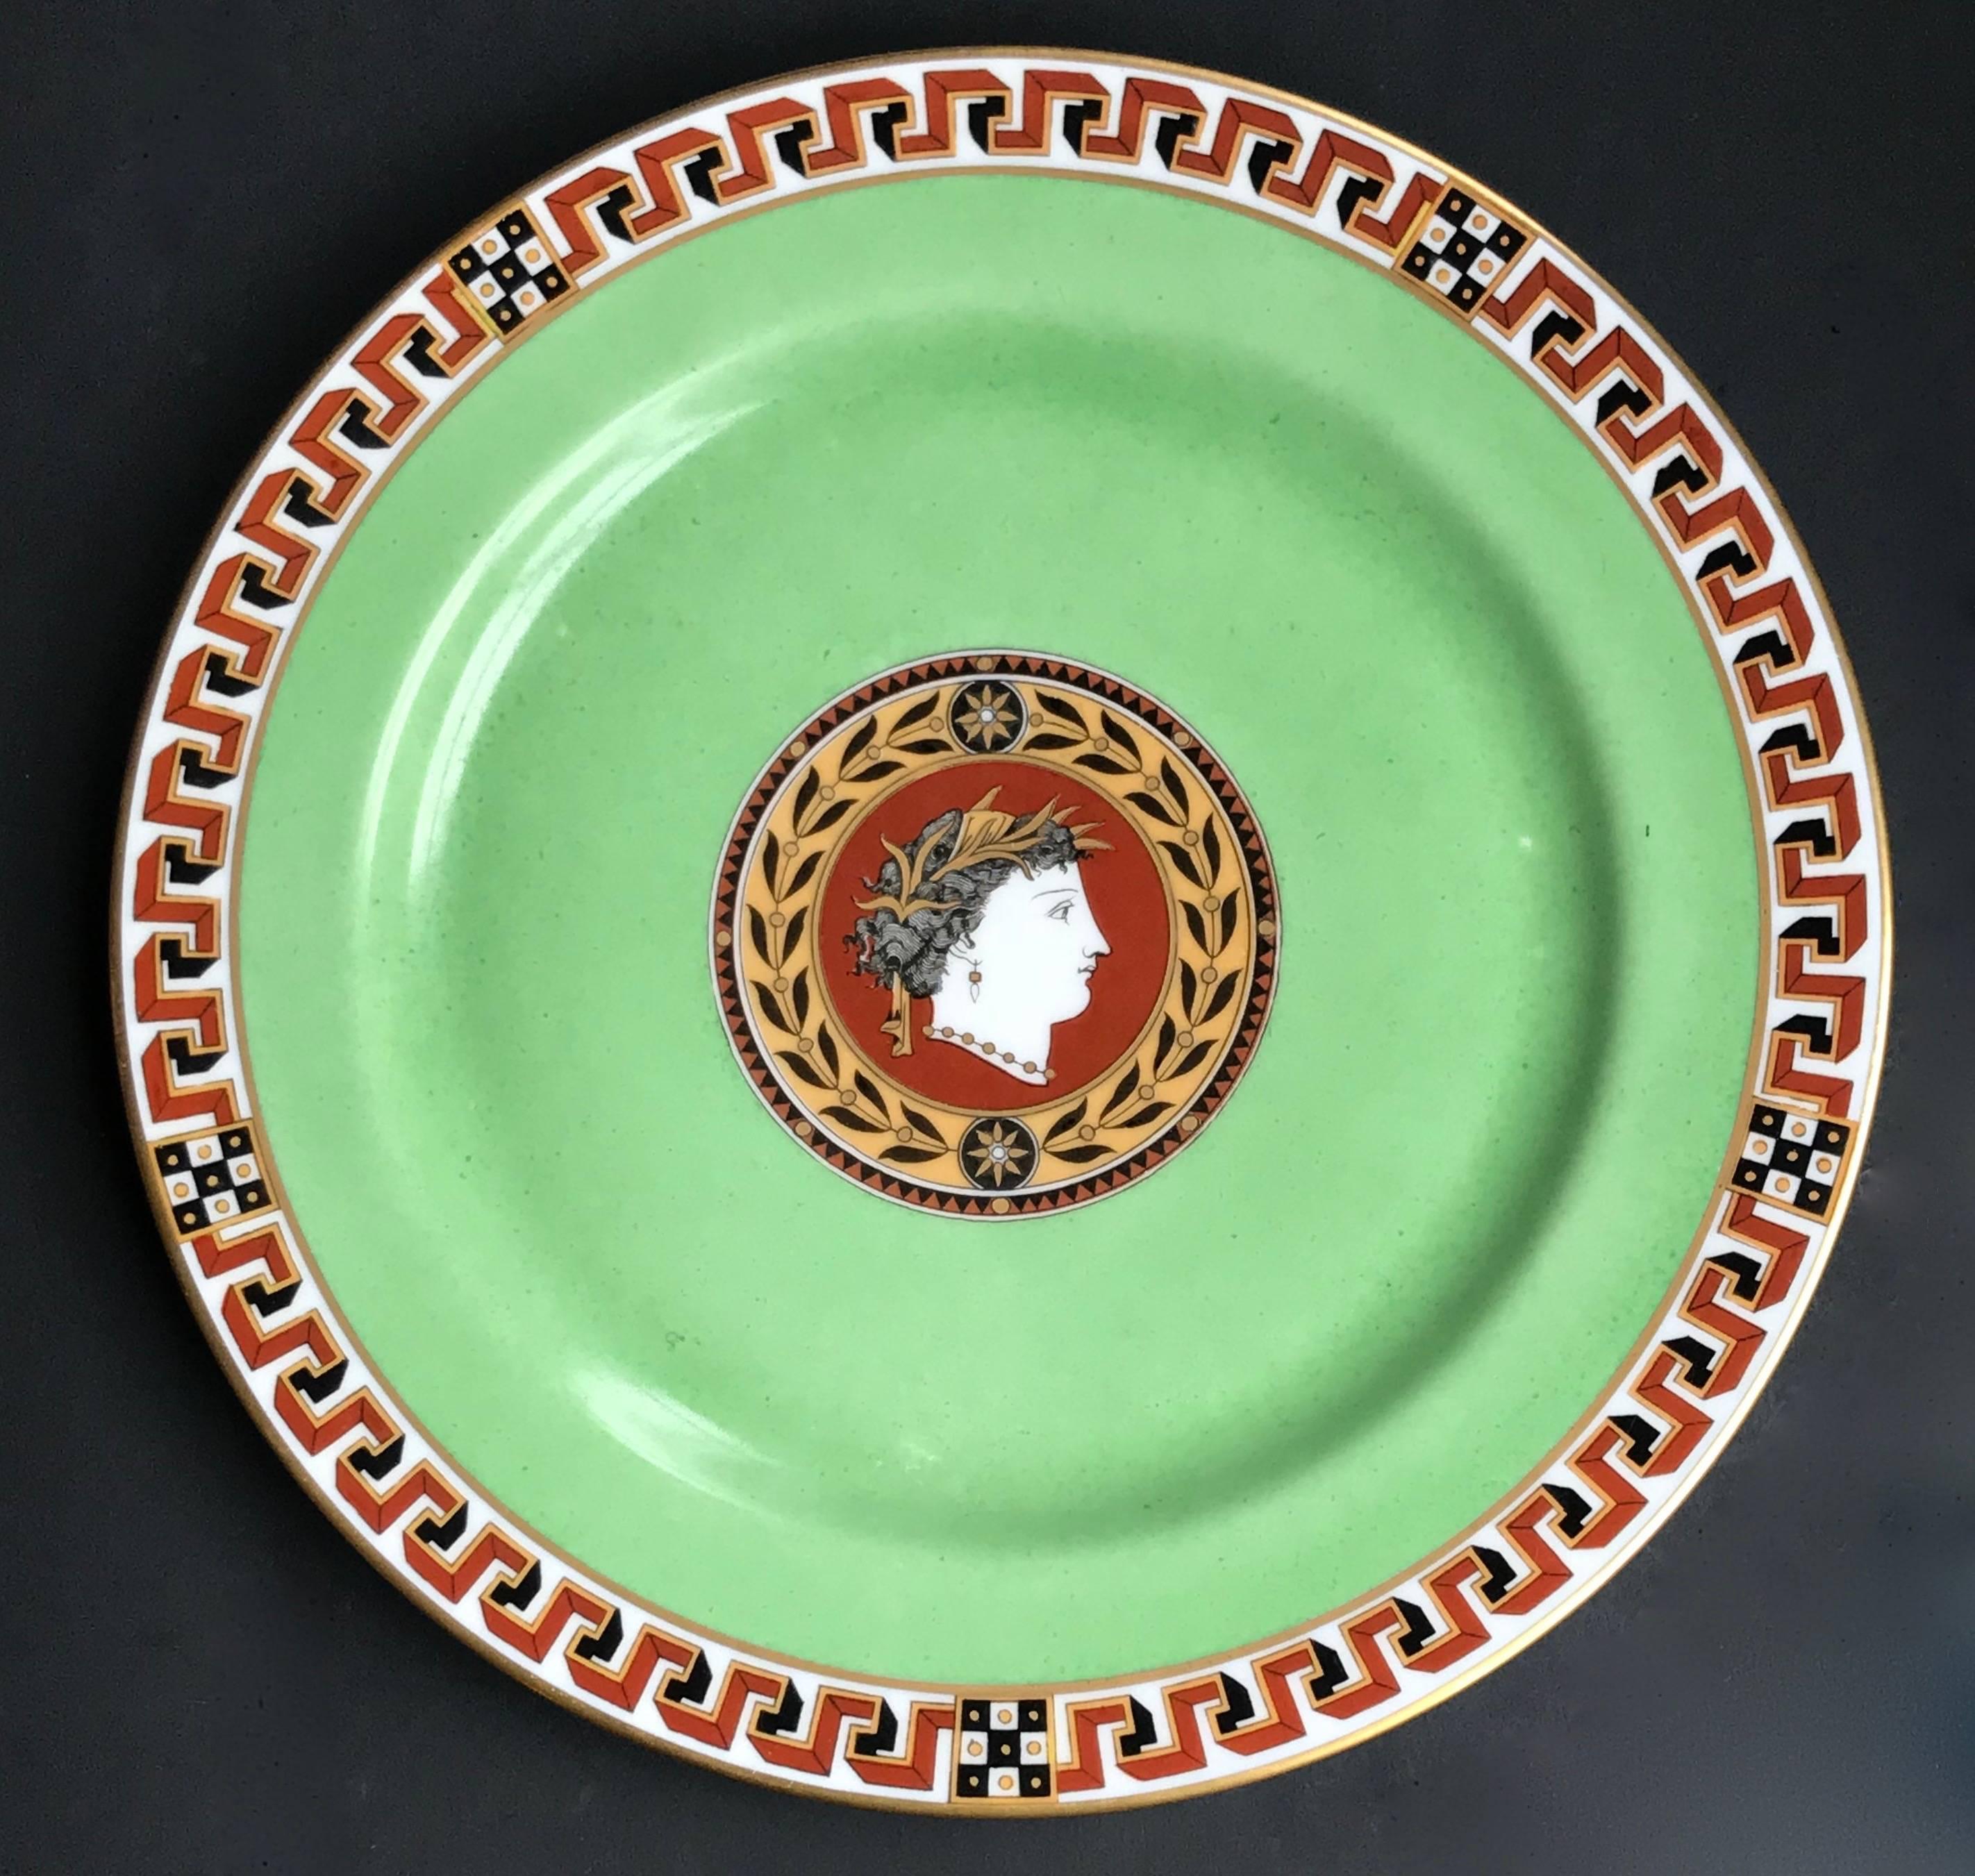 Pair of Limoges porcelain plates in the French Empire style with central medallion of a Grecian woman wearing a laurel crown in profile surmounted by laurel leaves. Greek key border and a beautiful and distinctive green ground. Gold border to edges